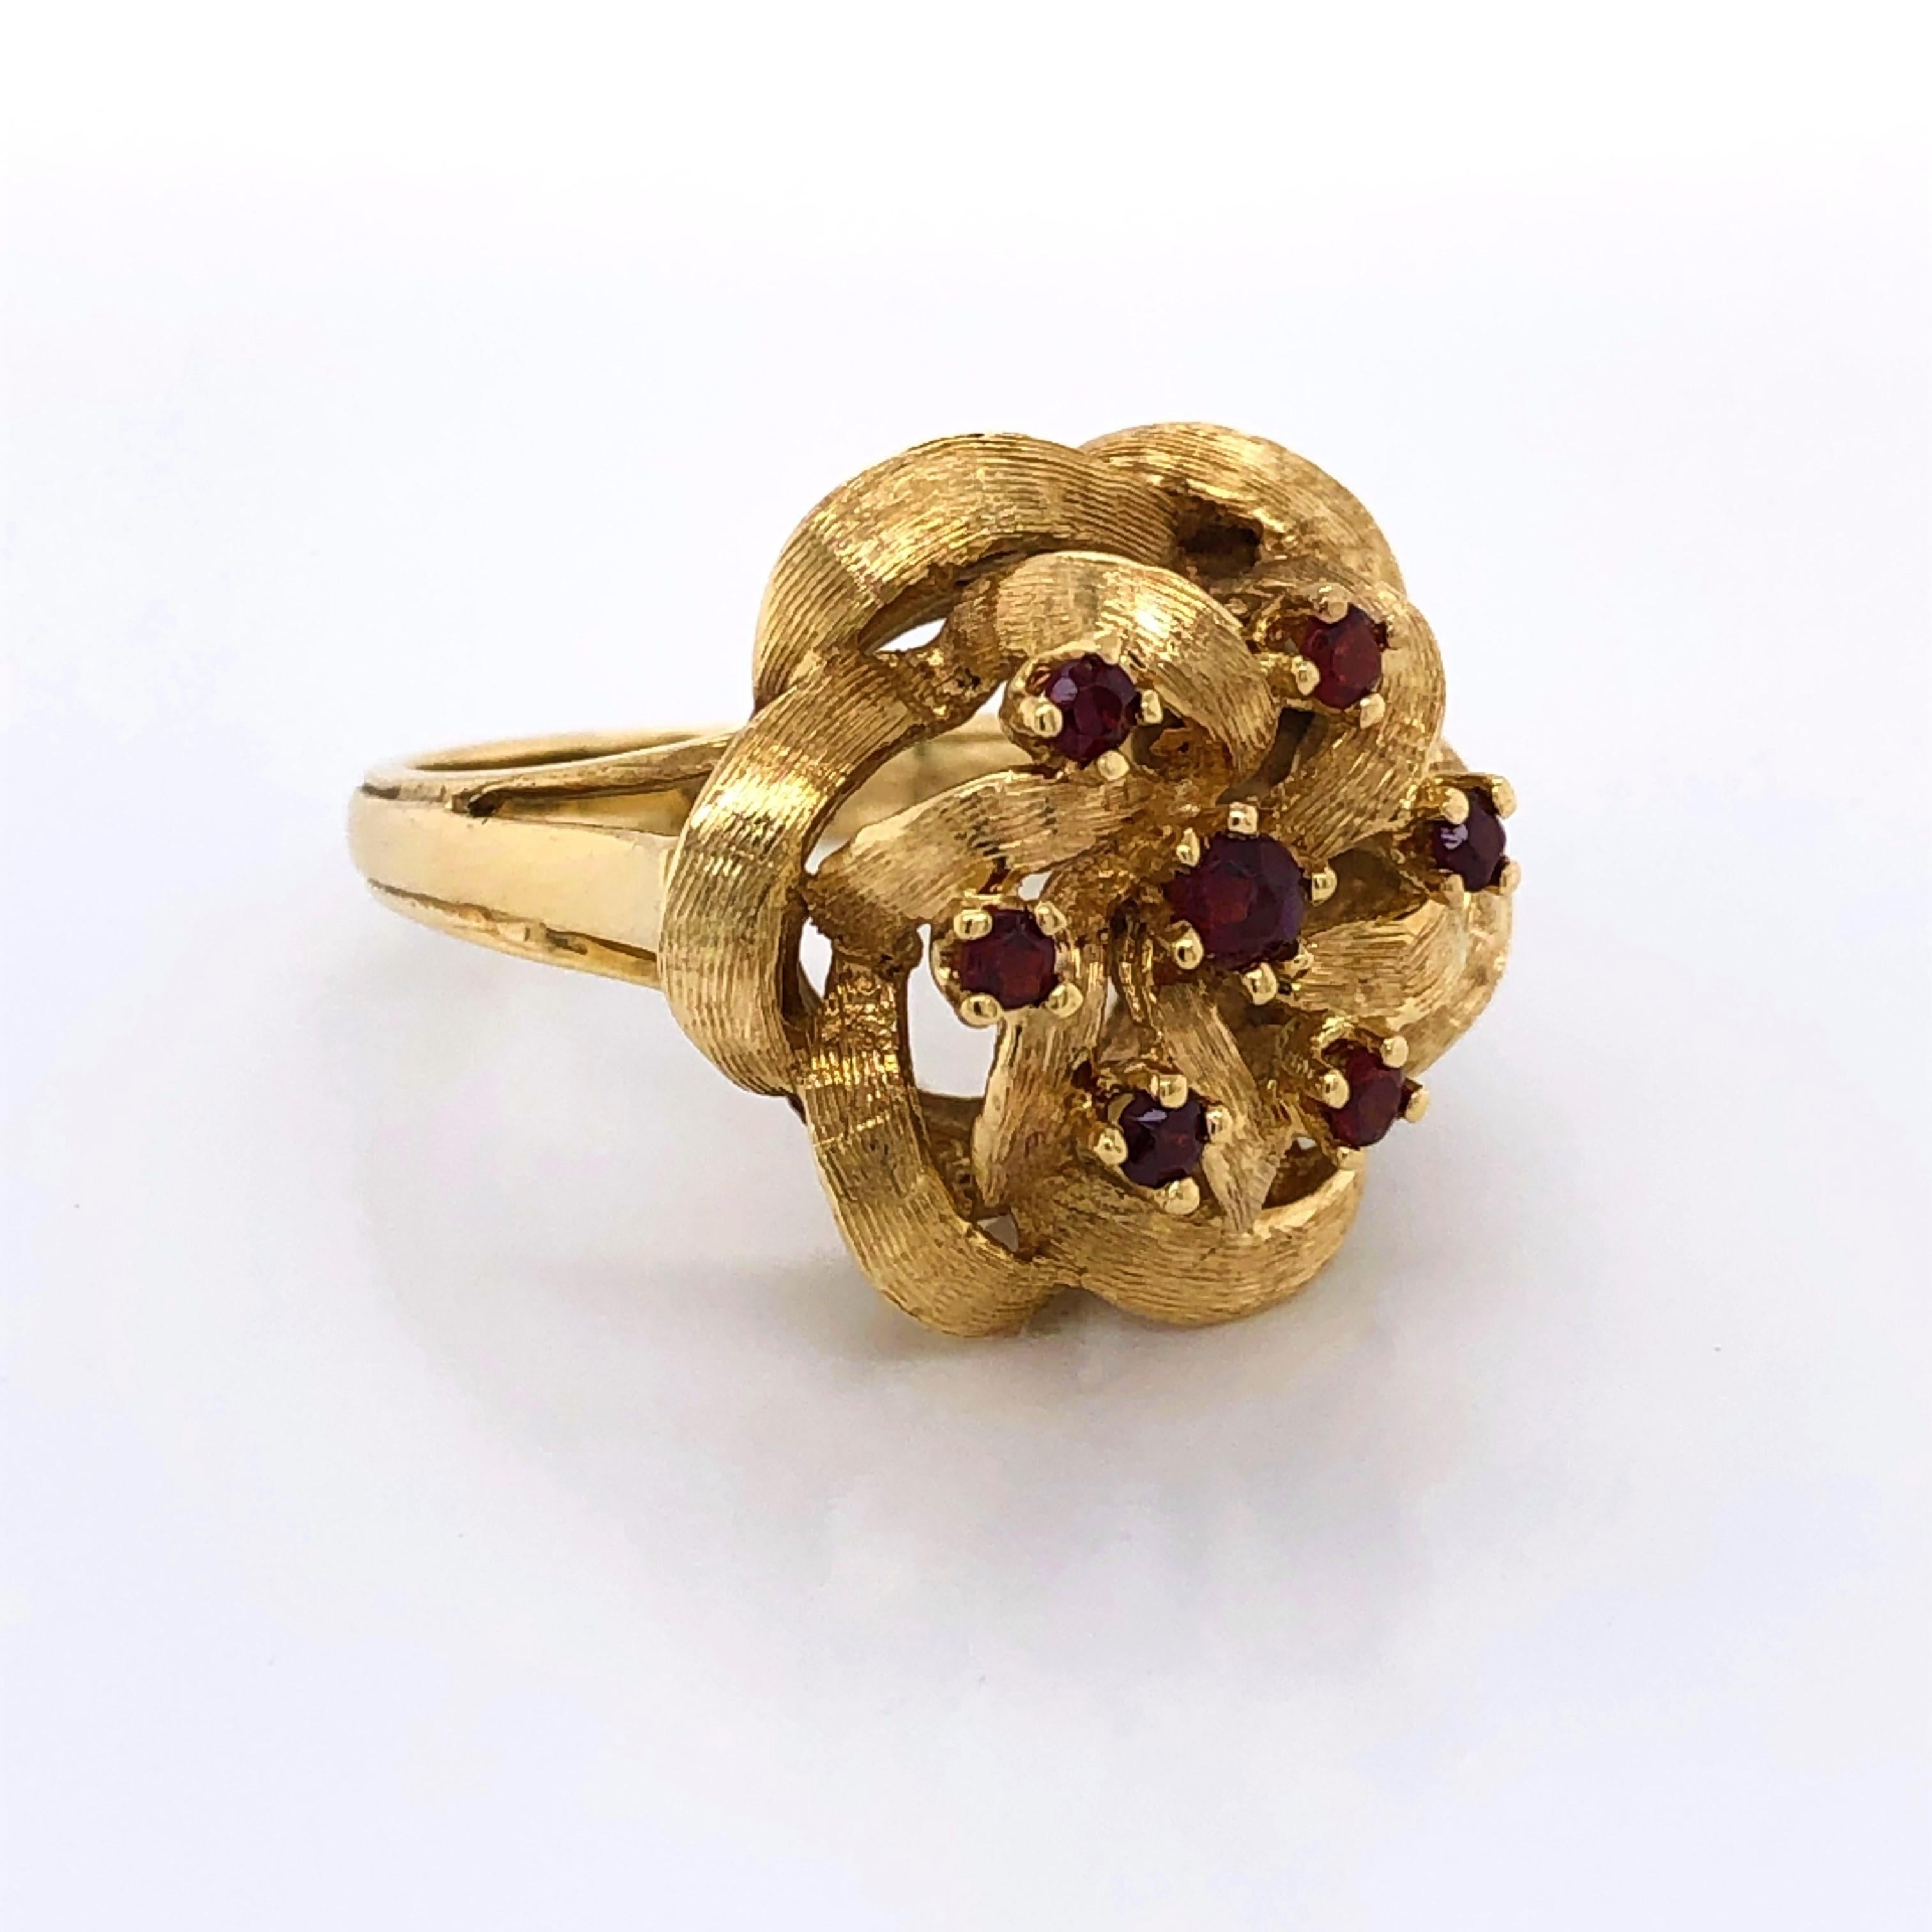 Twists of twelve karat yellow gold create the floral head of this lovely cocktail ring. The ribbon like petals formed by the open filigree are adorned with rose cut ruby gemstones, .14 carat total weight. In ring size 7.5 and sizable. Gift boxed.
